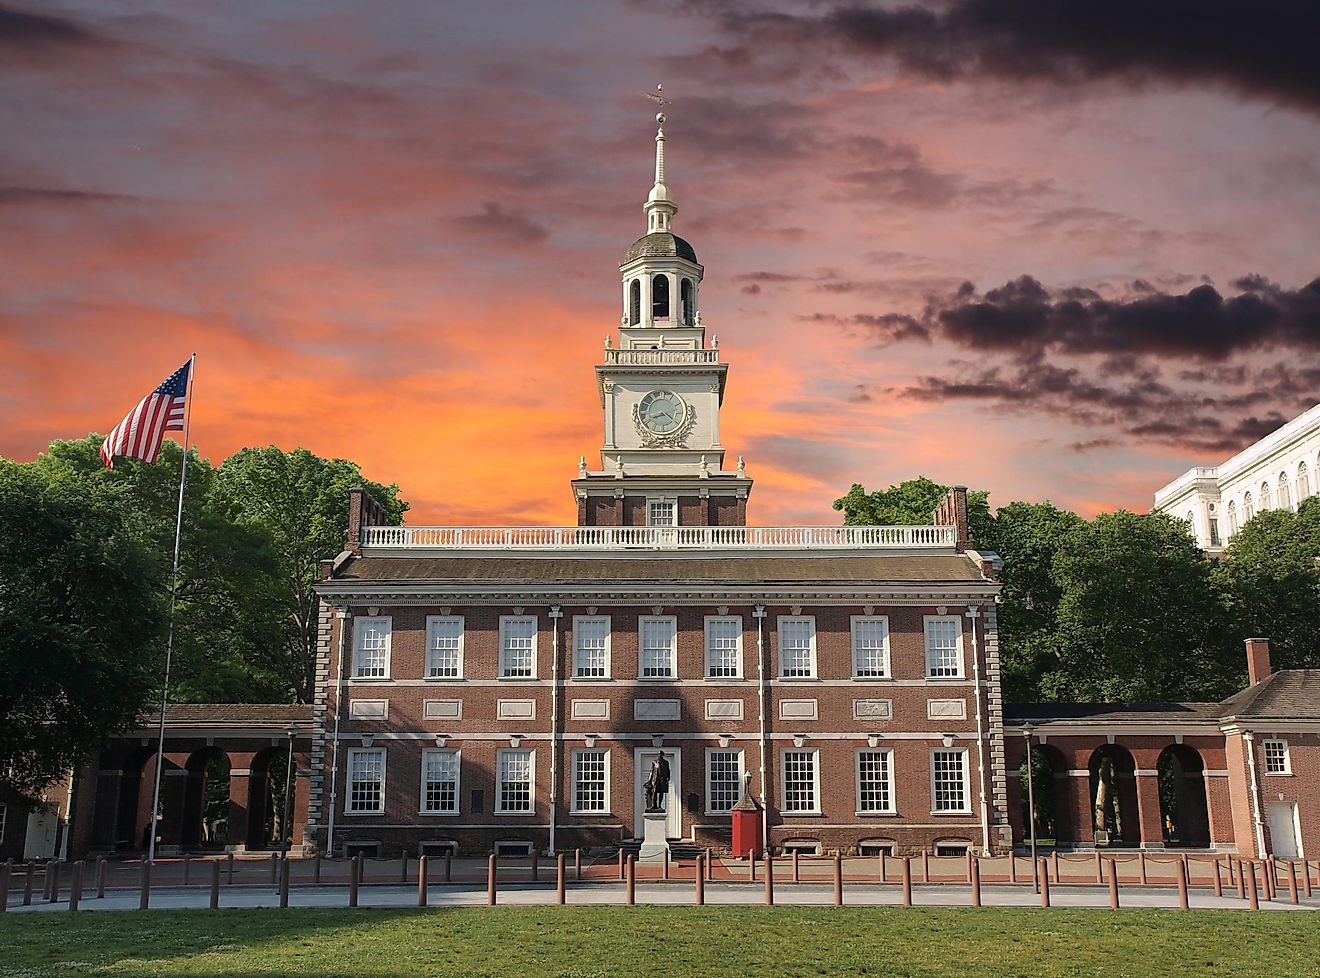 The Independence Hall is known to anyone with even a mild interest in architecture.